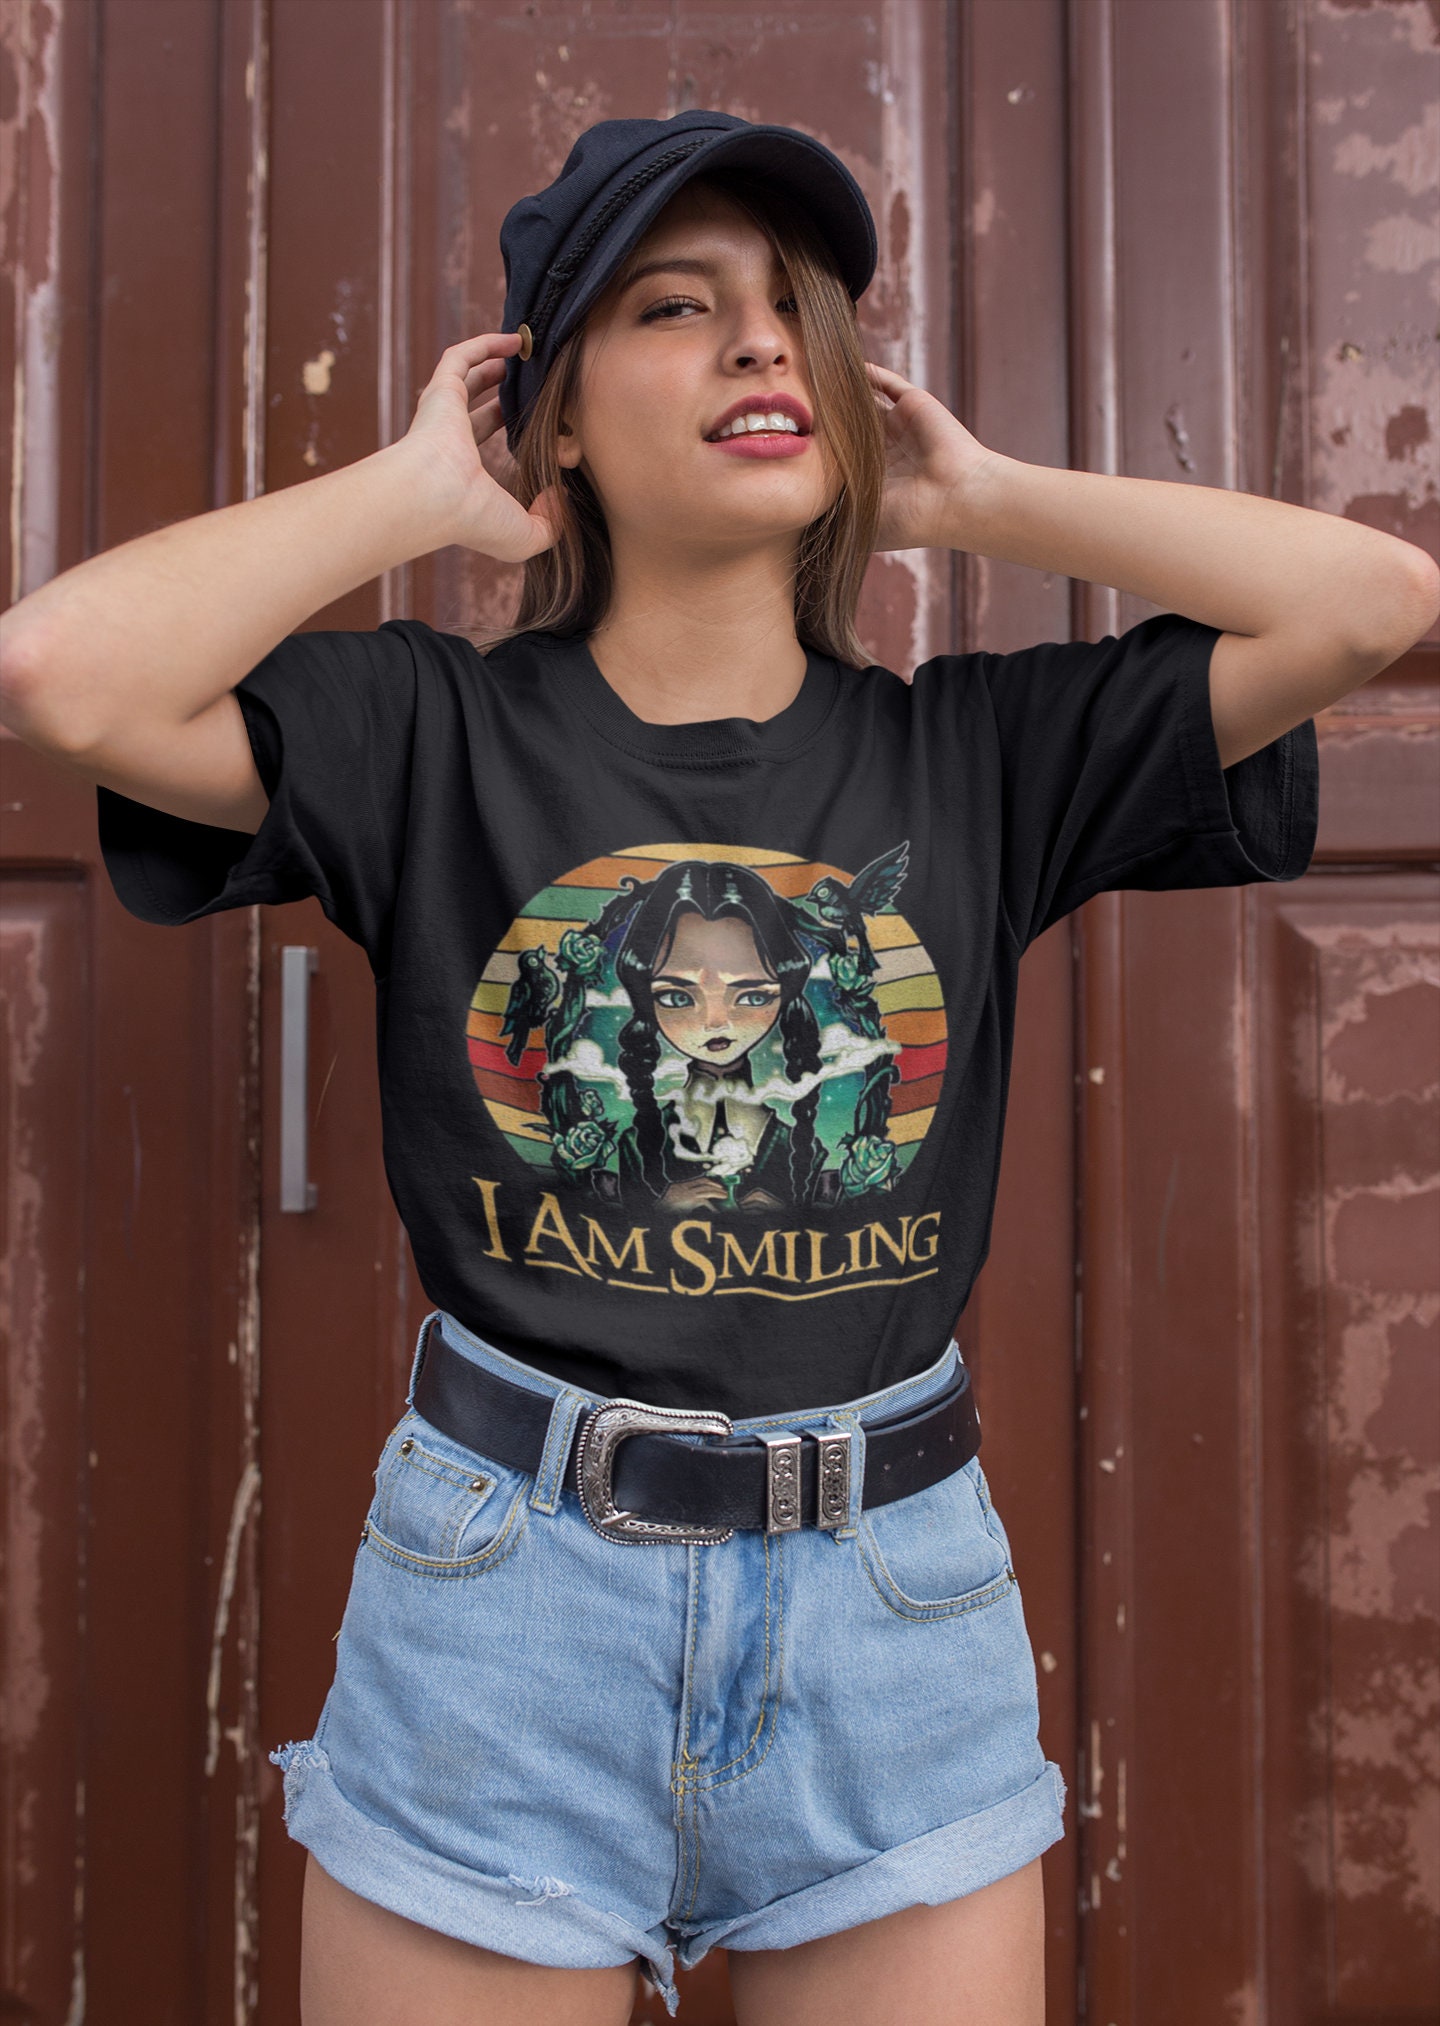 Discover Wednesday Addams I Am Smiling Vintage T-Shirt, Wednesday Addams Shirt, Addams Family Shirts